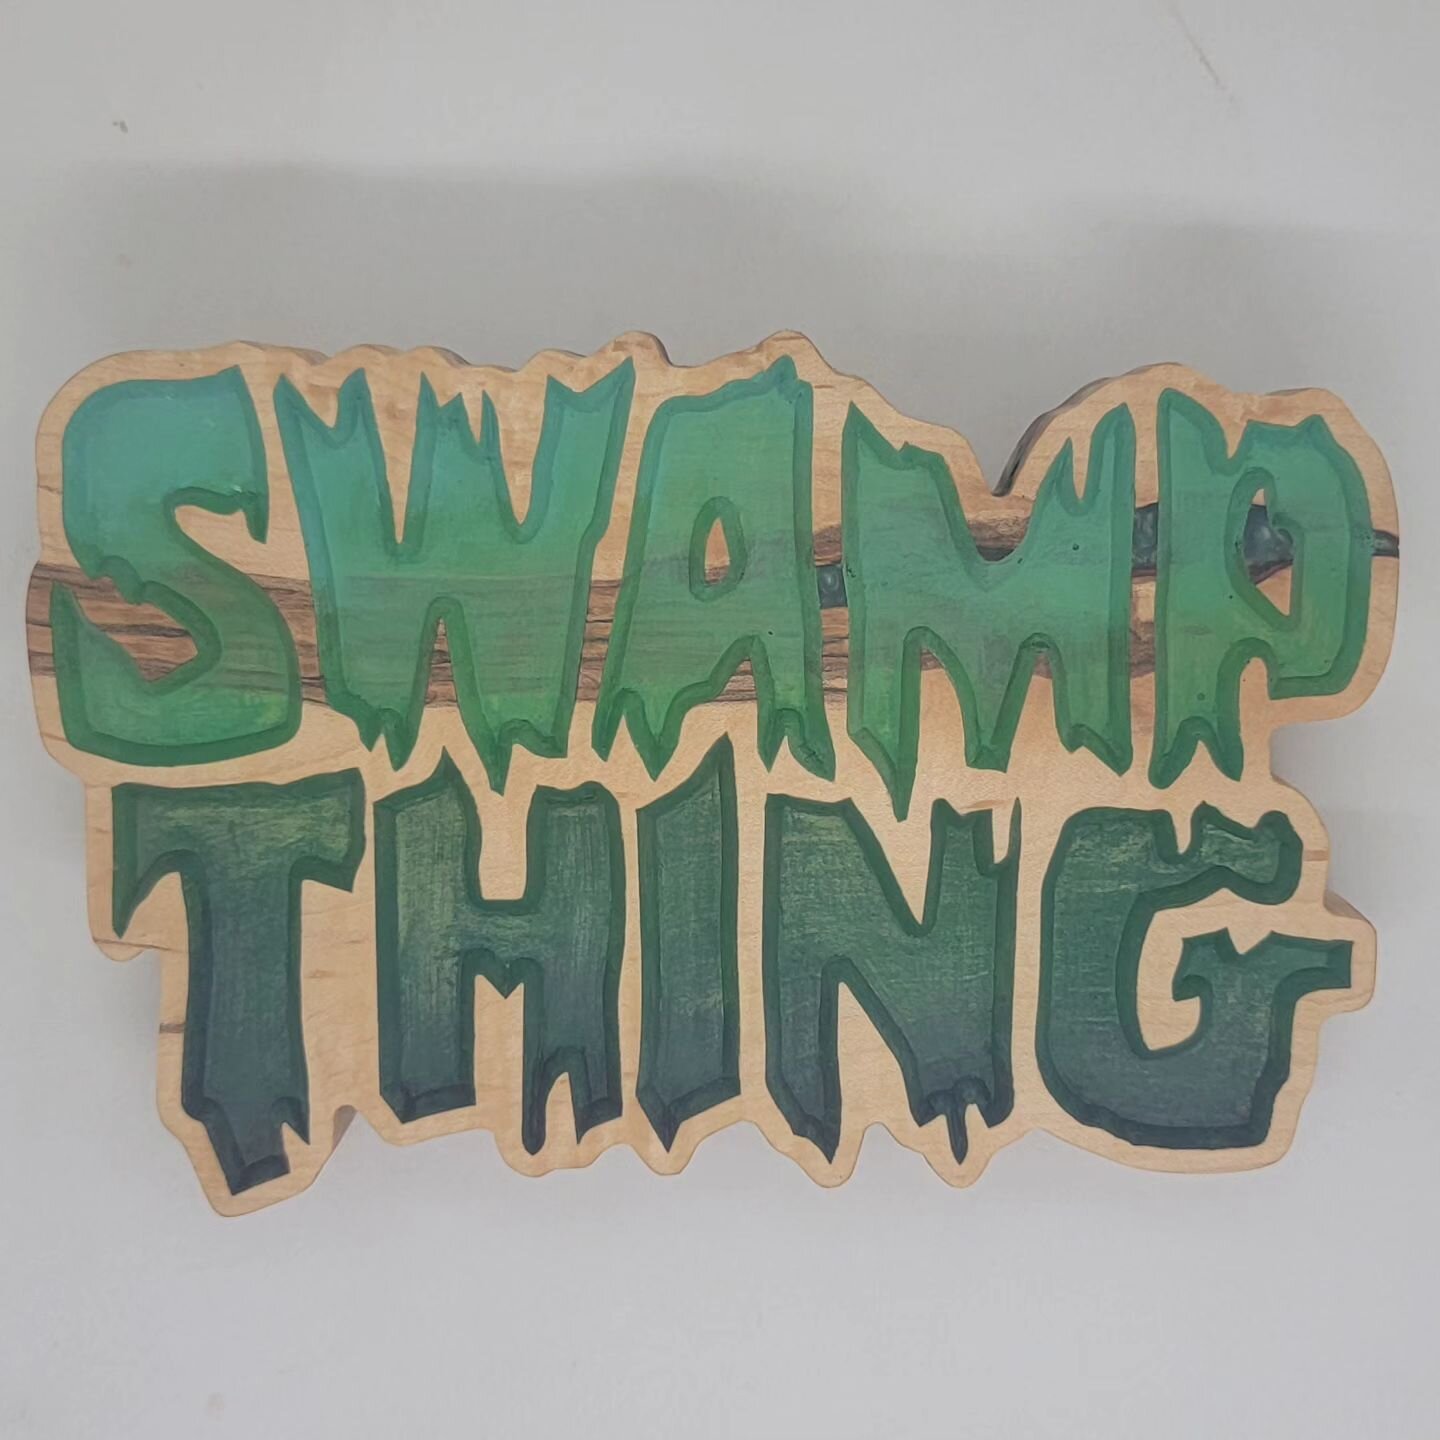 Finished swamp thing carving in some maple 🍁 
&bull;
&bull;
&bull;
&bull;
&bull;
#custommade #custom ##customsign #sign #maple #hardwood #cnc #wallabis #woodart #wooden ##wood #swampthing #comicart #decor ##wallart #woodcarving #carving #woodworking